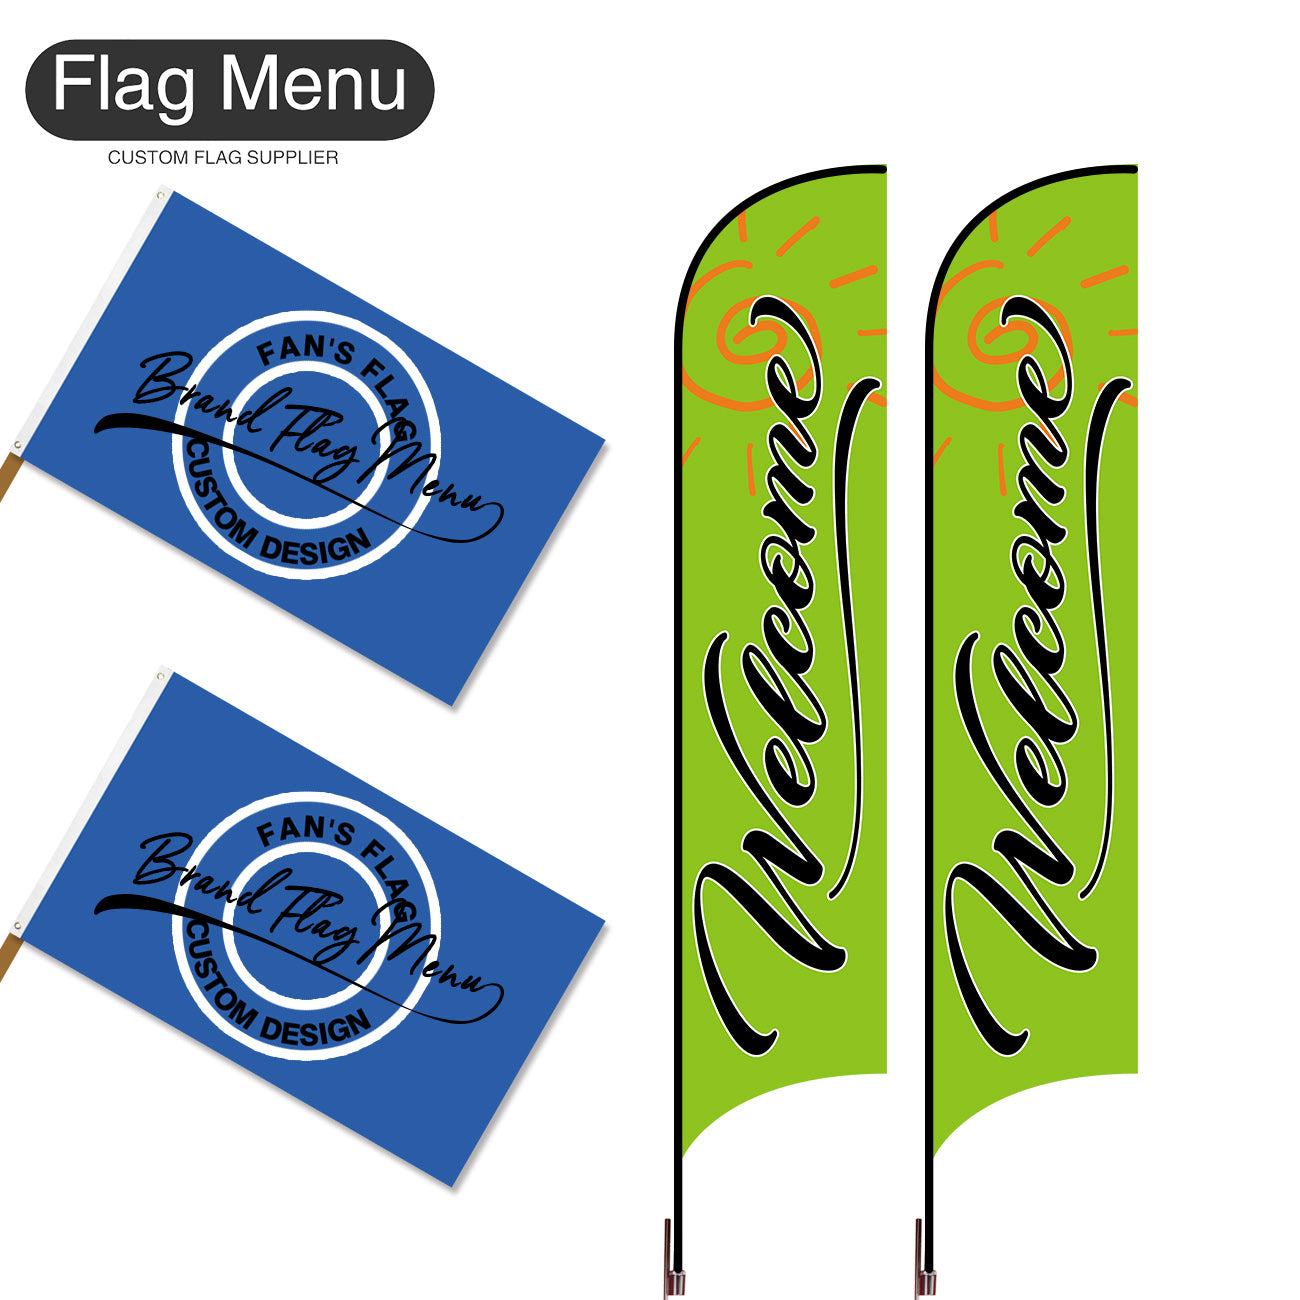 Outdoor Advertising Set - D-Green B-S - Feather Flag -Double Sided & 3'x5' Regular Flag -Single Sided-Cross & Water Bag-Flag Menu